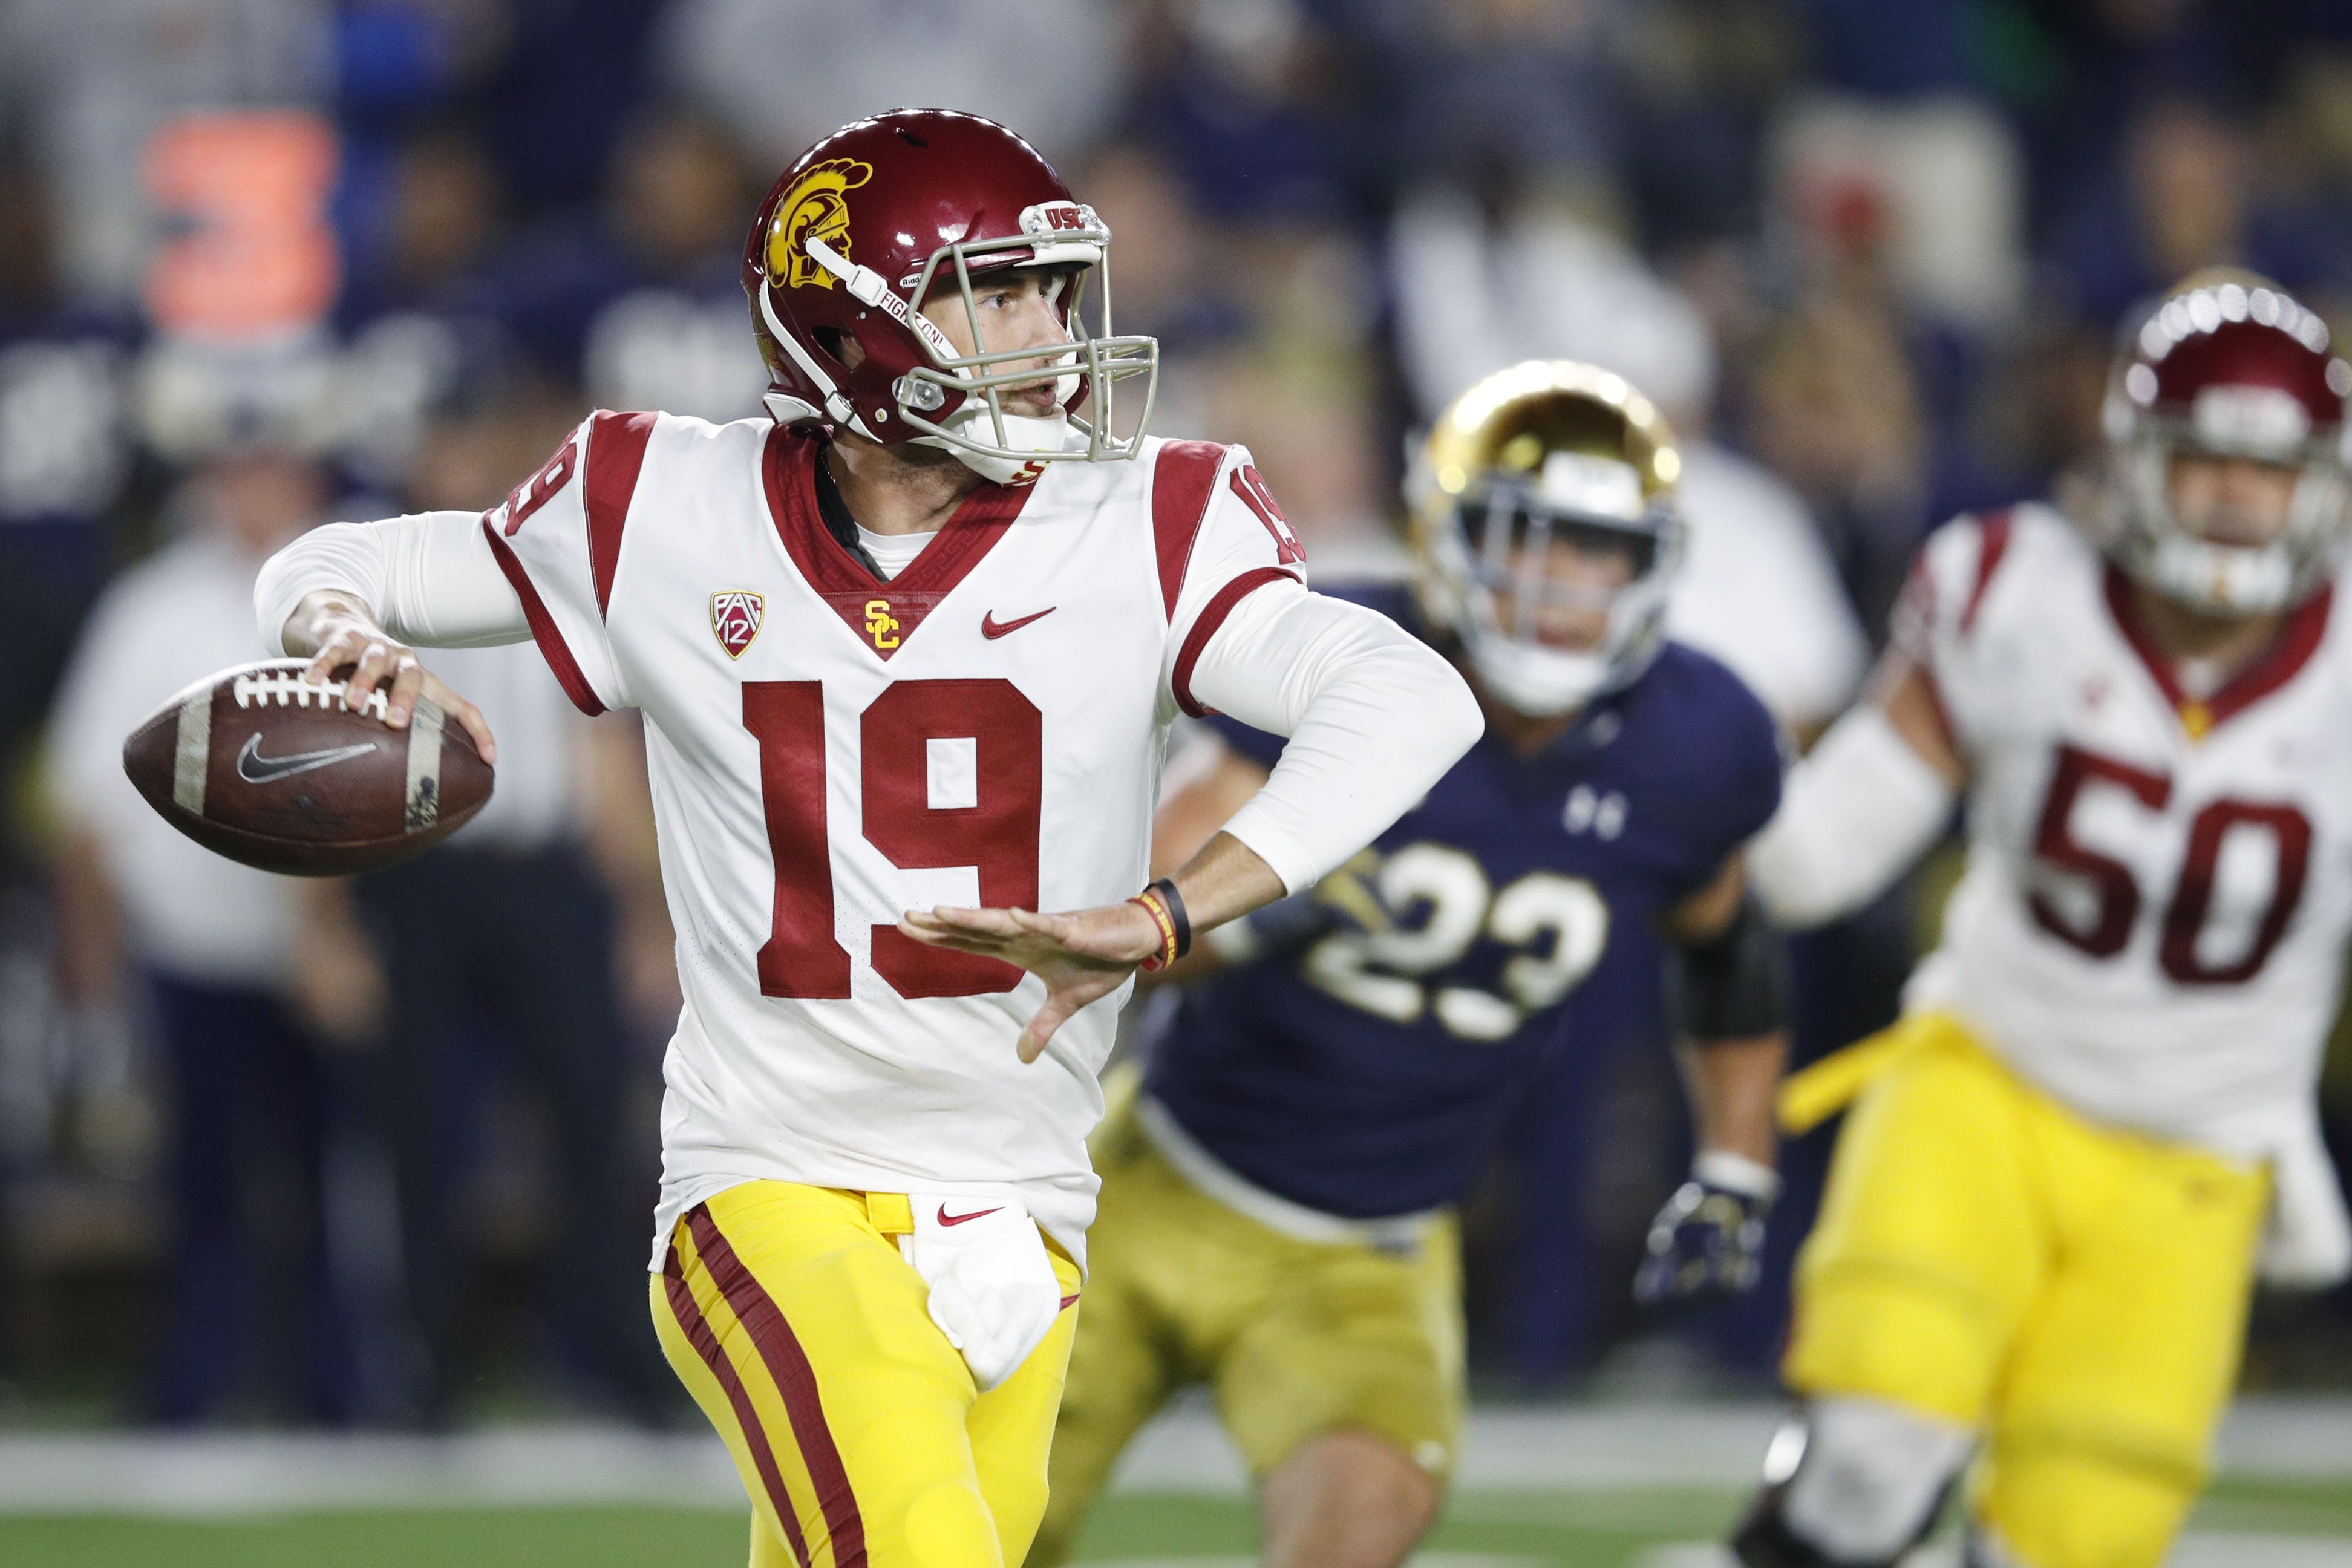 USC Football Depth Chart 2018: Pre-Spring Camp projected starting lineup